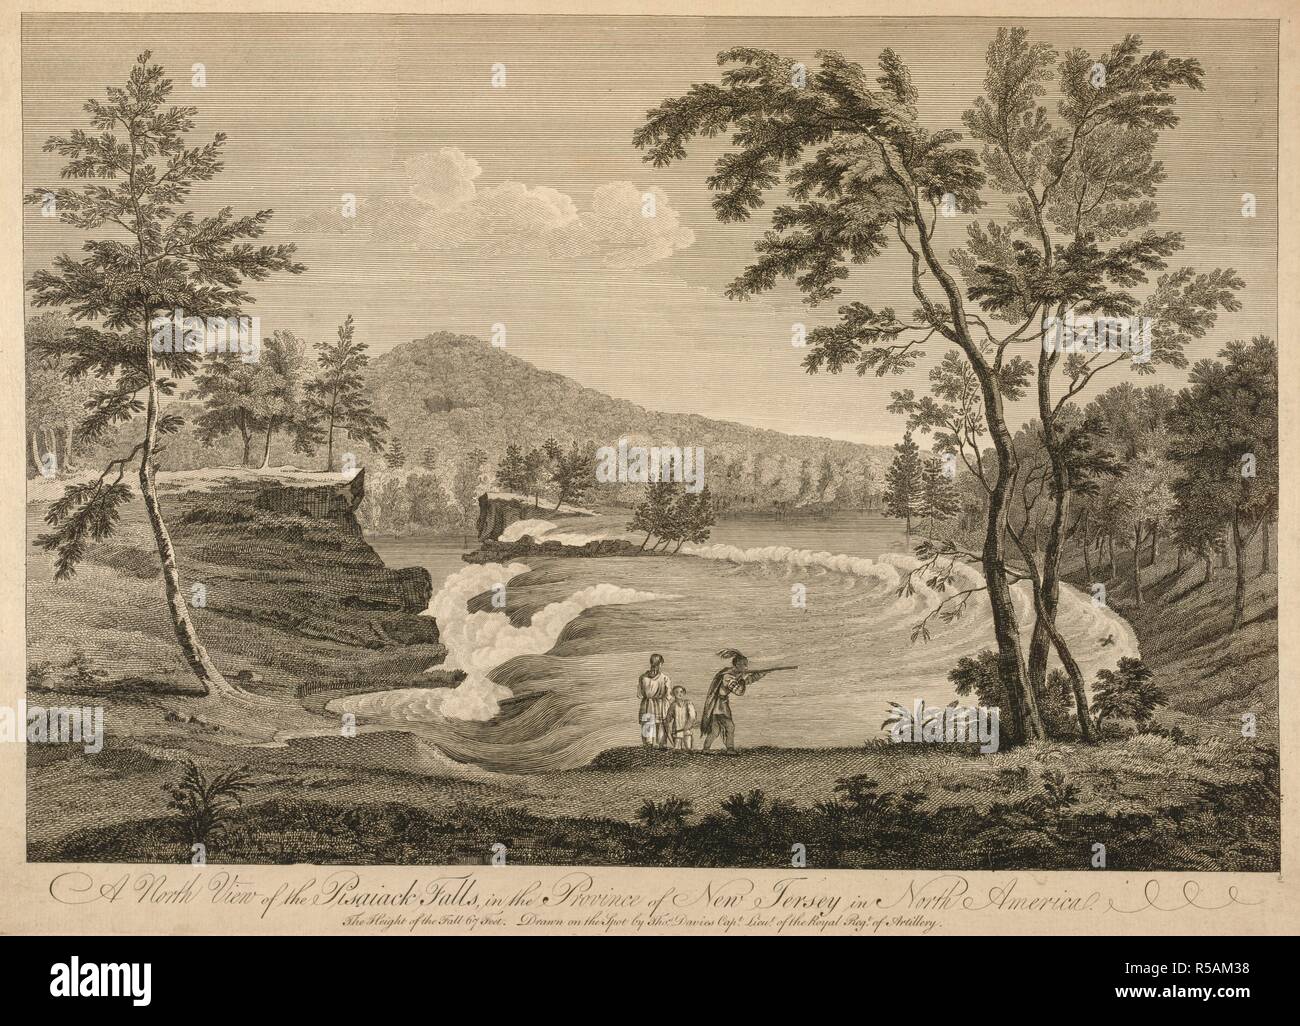 A man wearing a short tunic and a feathered head-dress stands under the trees by a waterfall pointing his rifle at a bird in the foreground. A woman and a child can been seen next to him, and a mountain and forest in the background. A North View of the Pisaiack Falls, in the Province of New Jersey in North America : The Height of the Fall 67 Feet. [London] : [publisher not identified], [1765]. Etching and engraving. Source: Maps K.Top.122.31.a. Language: English. Stock Photo